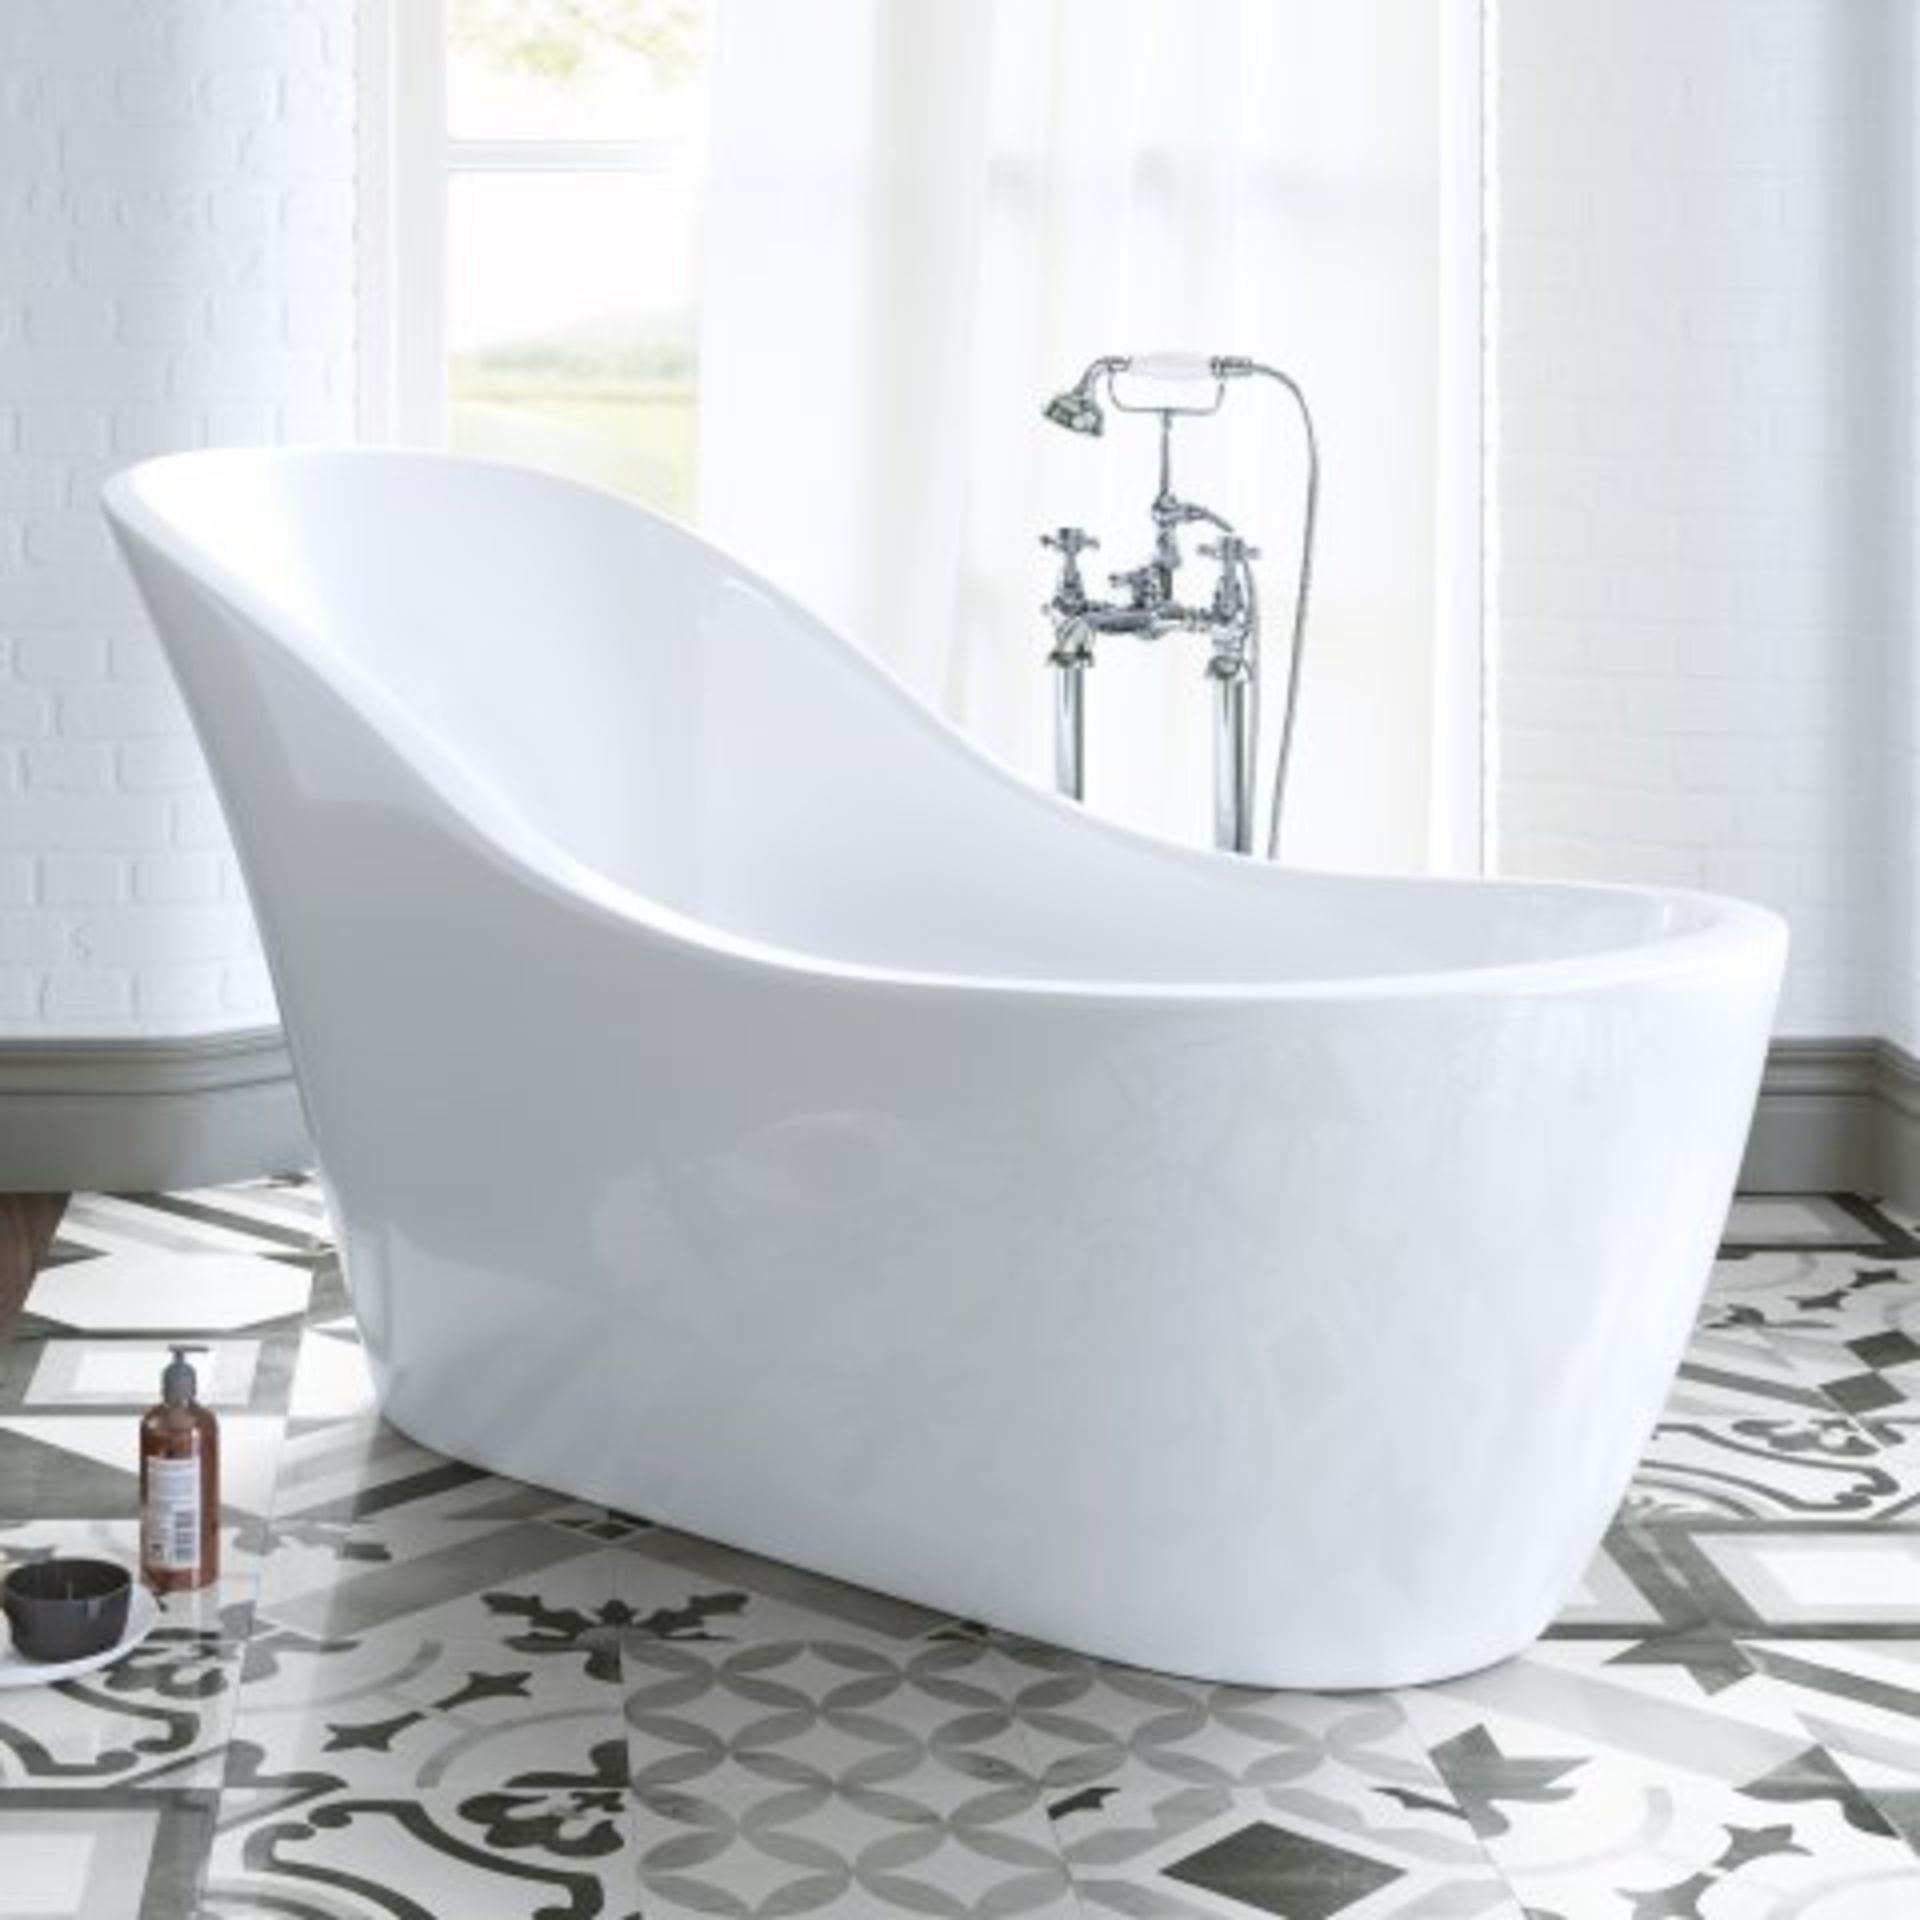 NEW & BOXED 1730x720MM Eve Freestanding Bath. RRP £2,499.BR264.This gloss white free-standing...